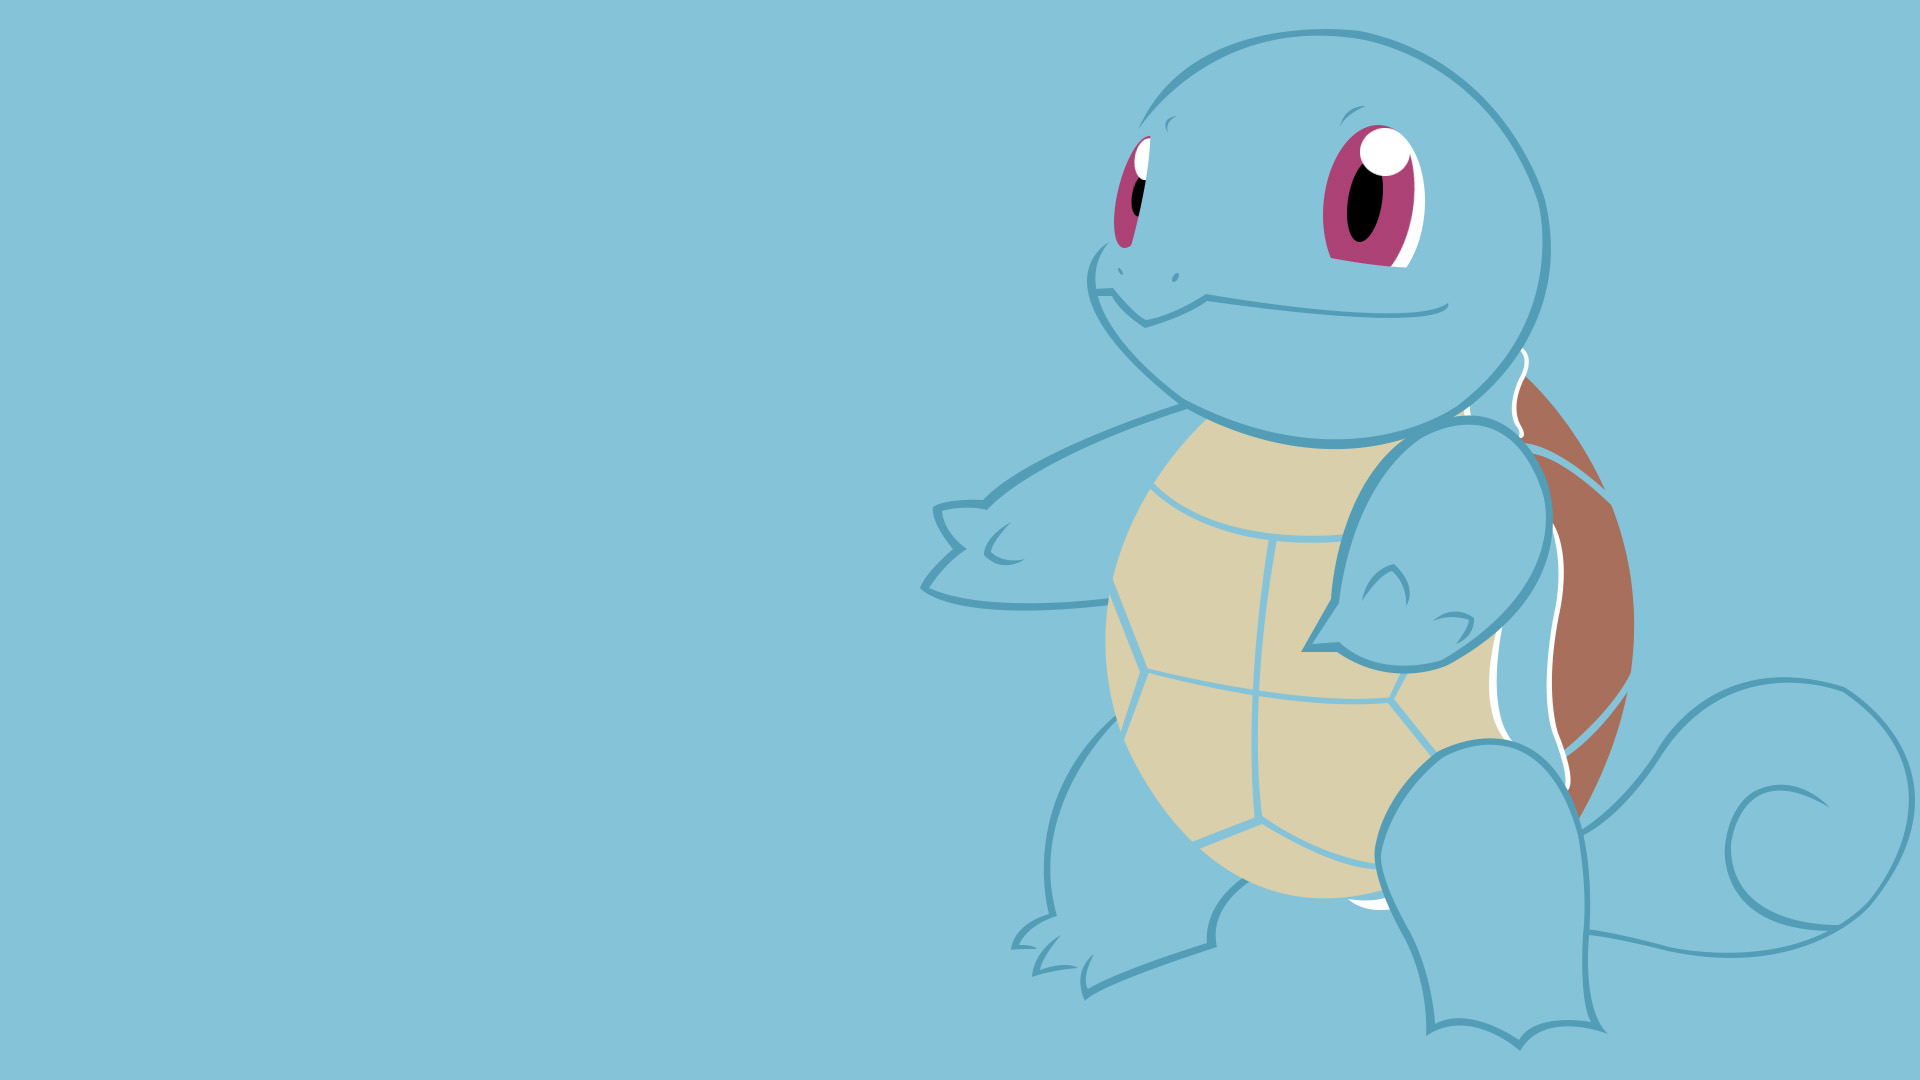 Squirtle by Sagmant